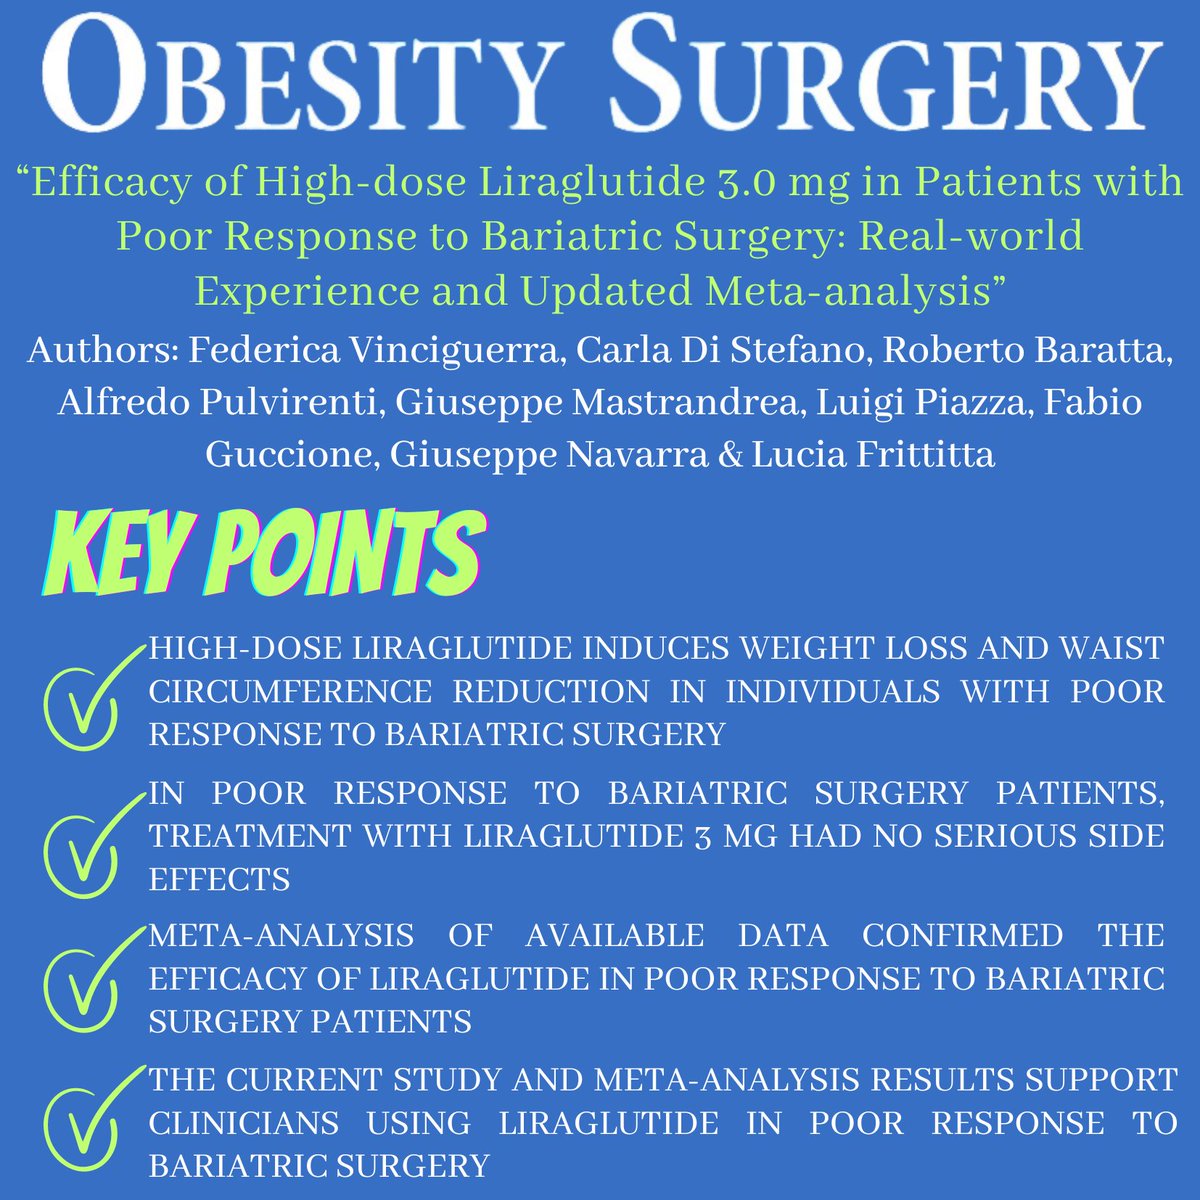 BEST PAPERS FEBRUARY ISSUE 'Efficacy of High-dose Liraglutide 3.0 mg in Patients with Poor Response to Bariatric Surgery: Real-world Experience and Updated Meta-analysis' DOI: doi.org/10.1007/s11695… FREE DOWNLOAD: rdcu.be/dzZL1